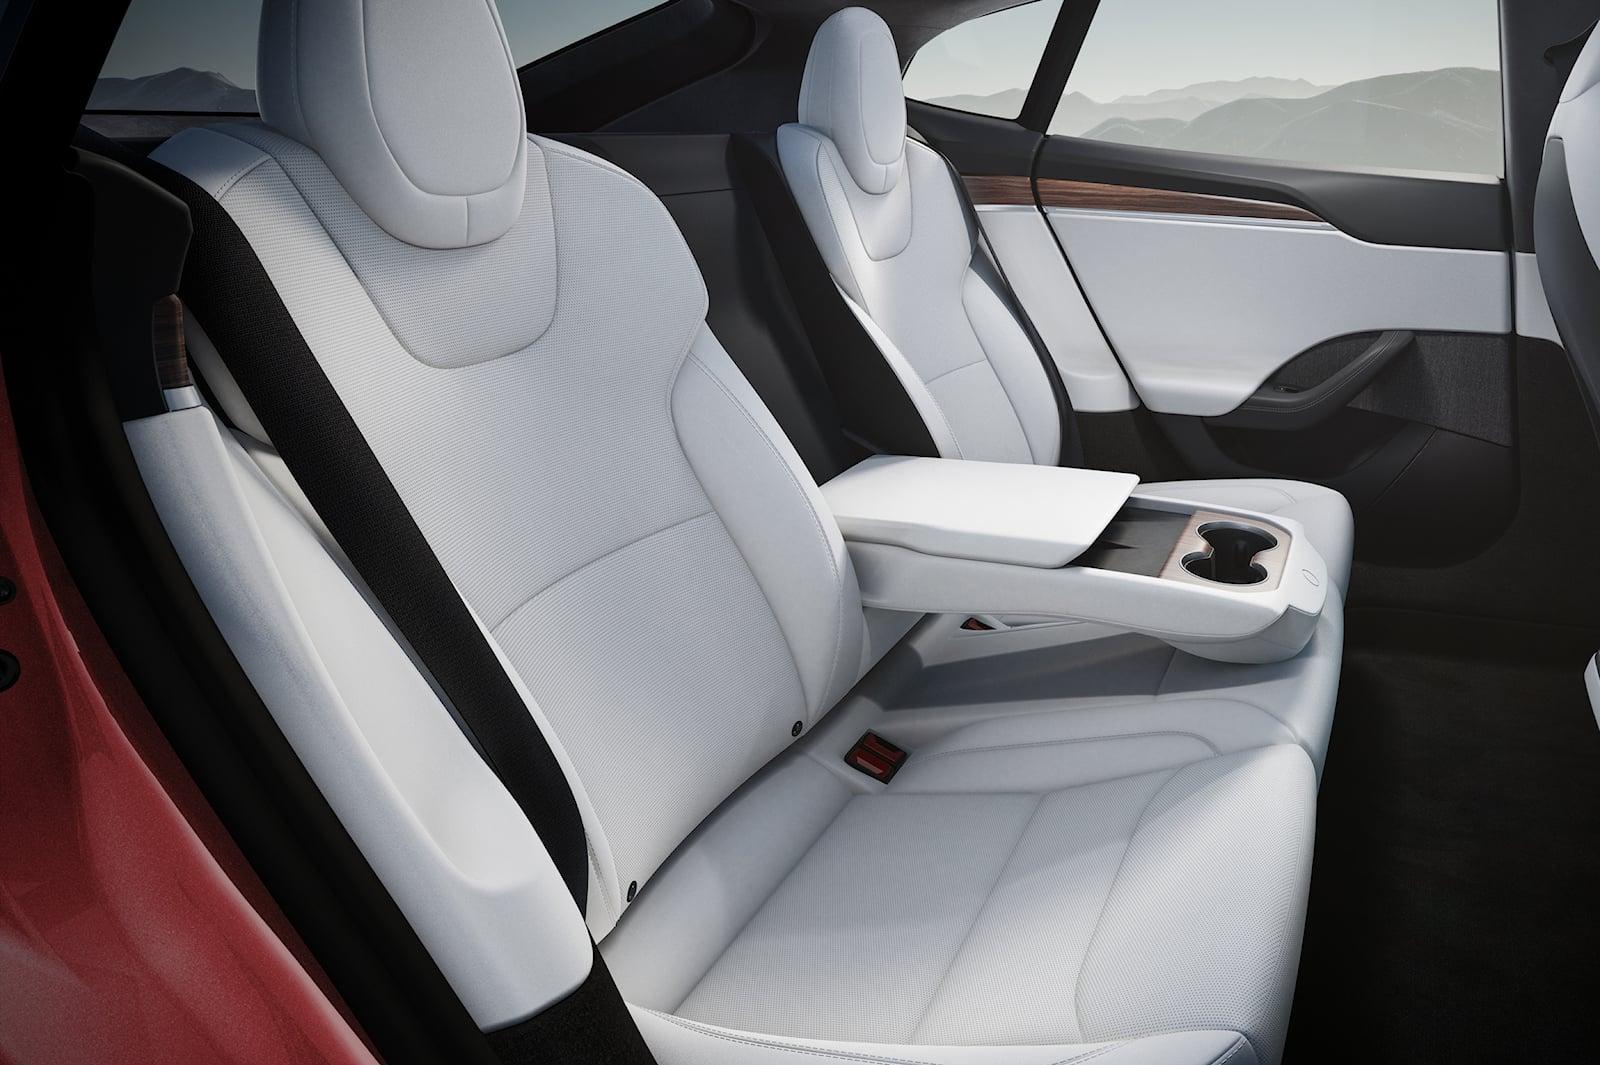 Tesla Model S Interior Dimensions Seating Cargo Space